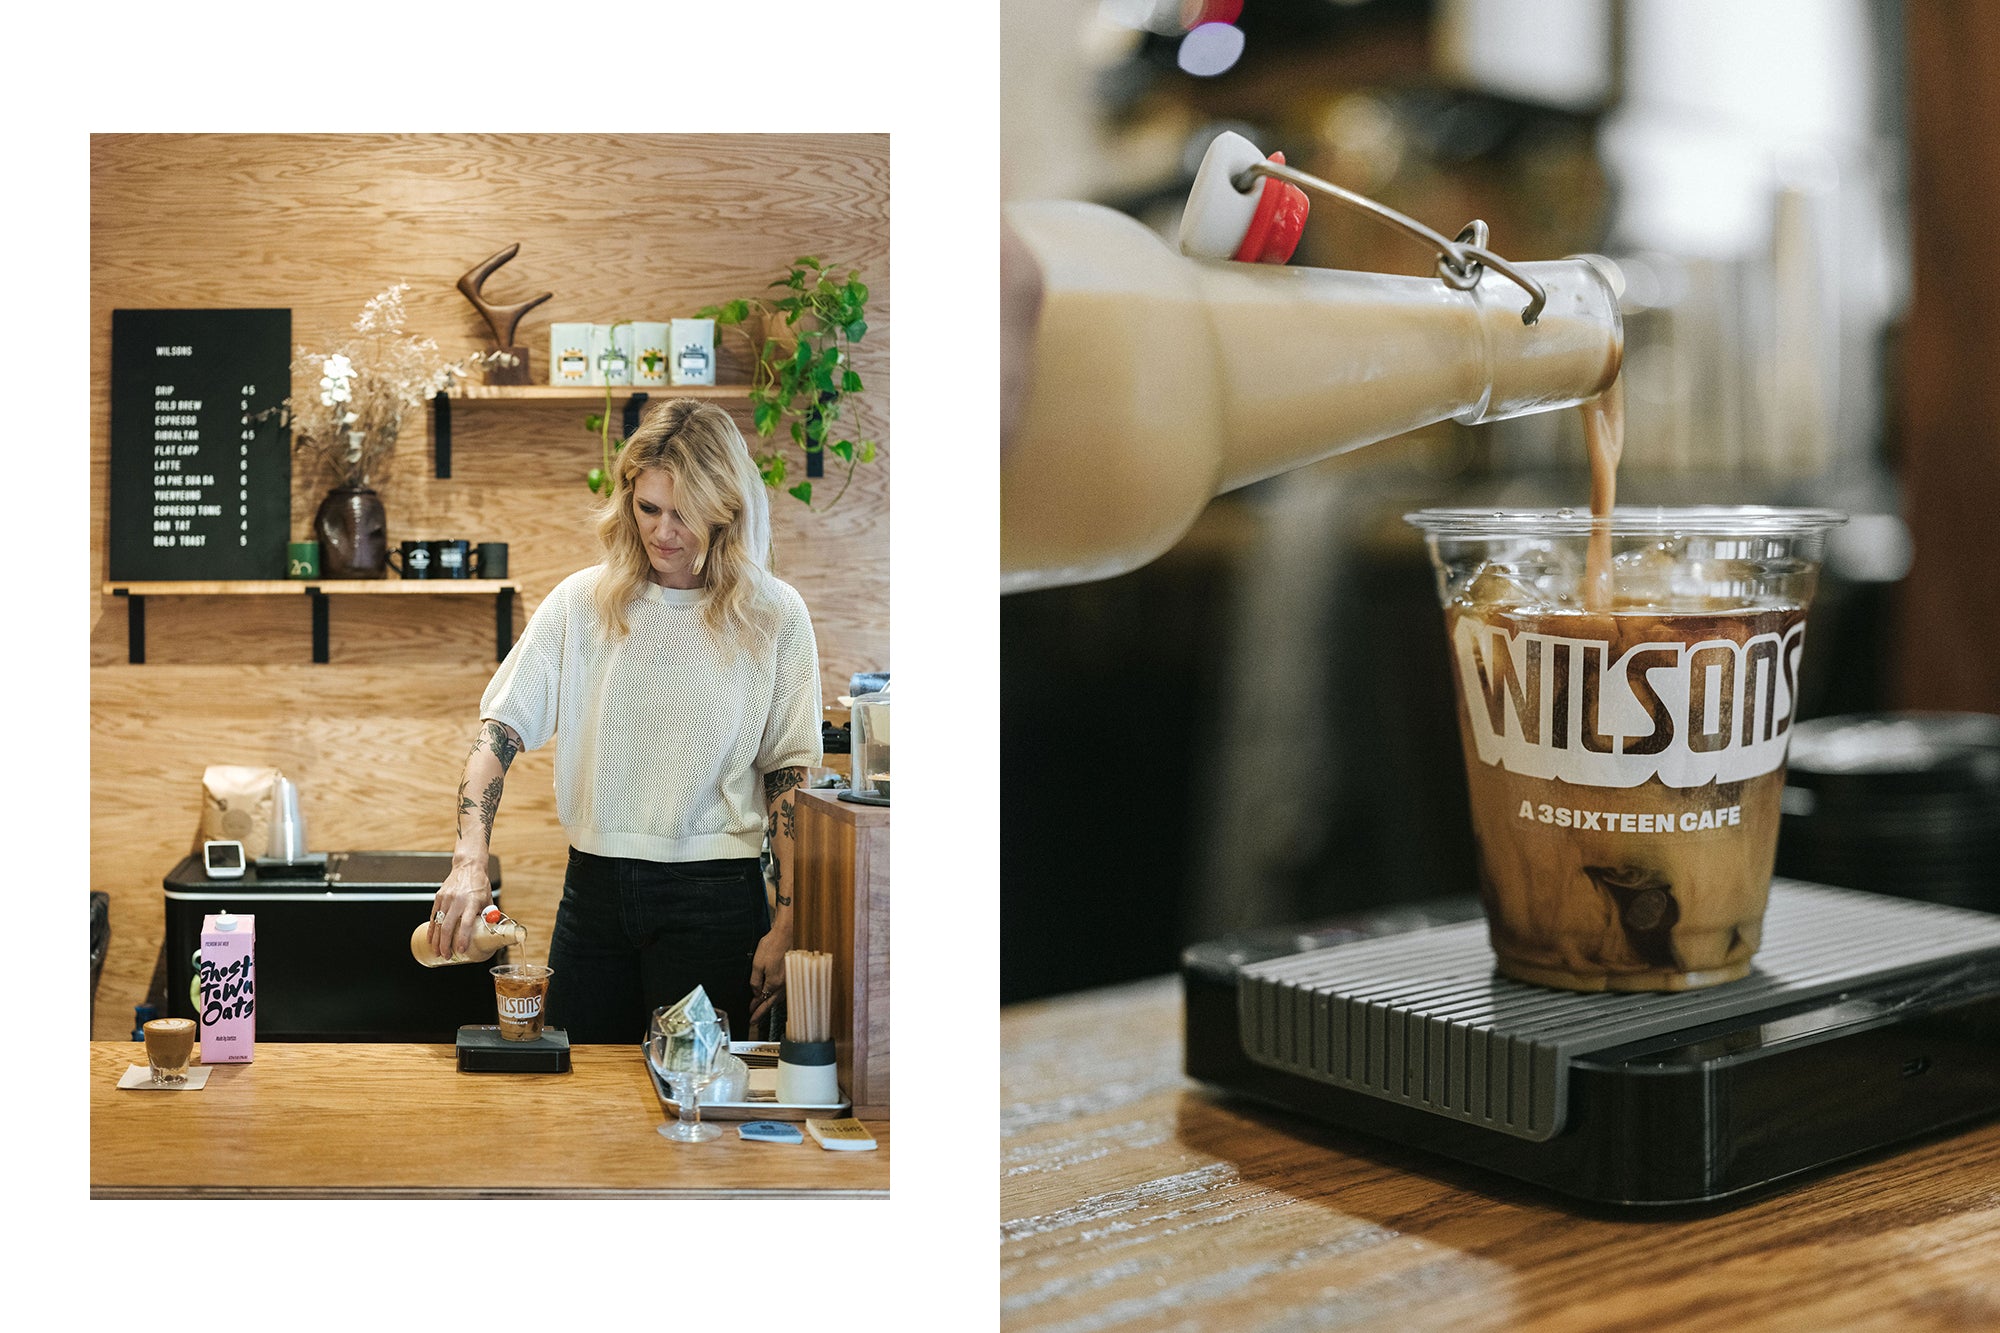 A diptych of a barista making an iced coffee drink.